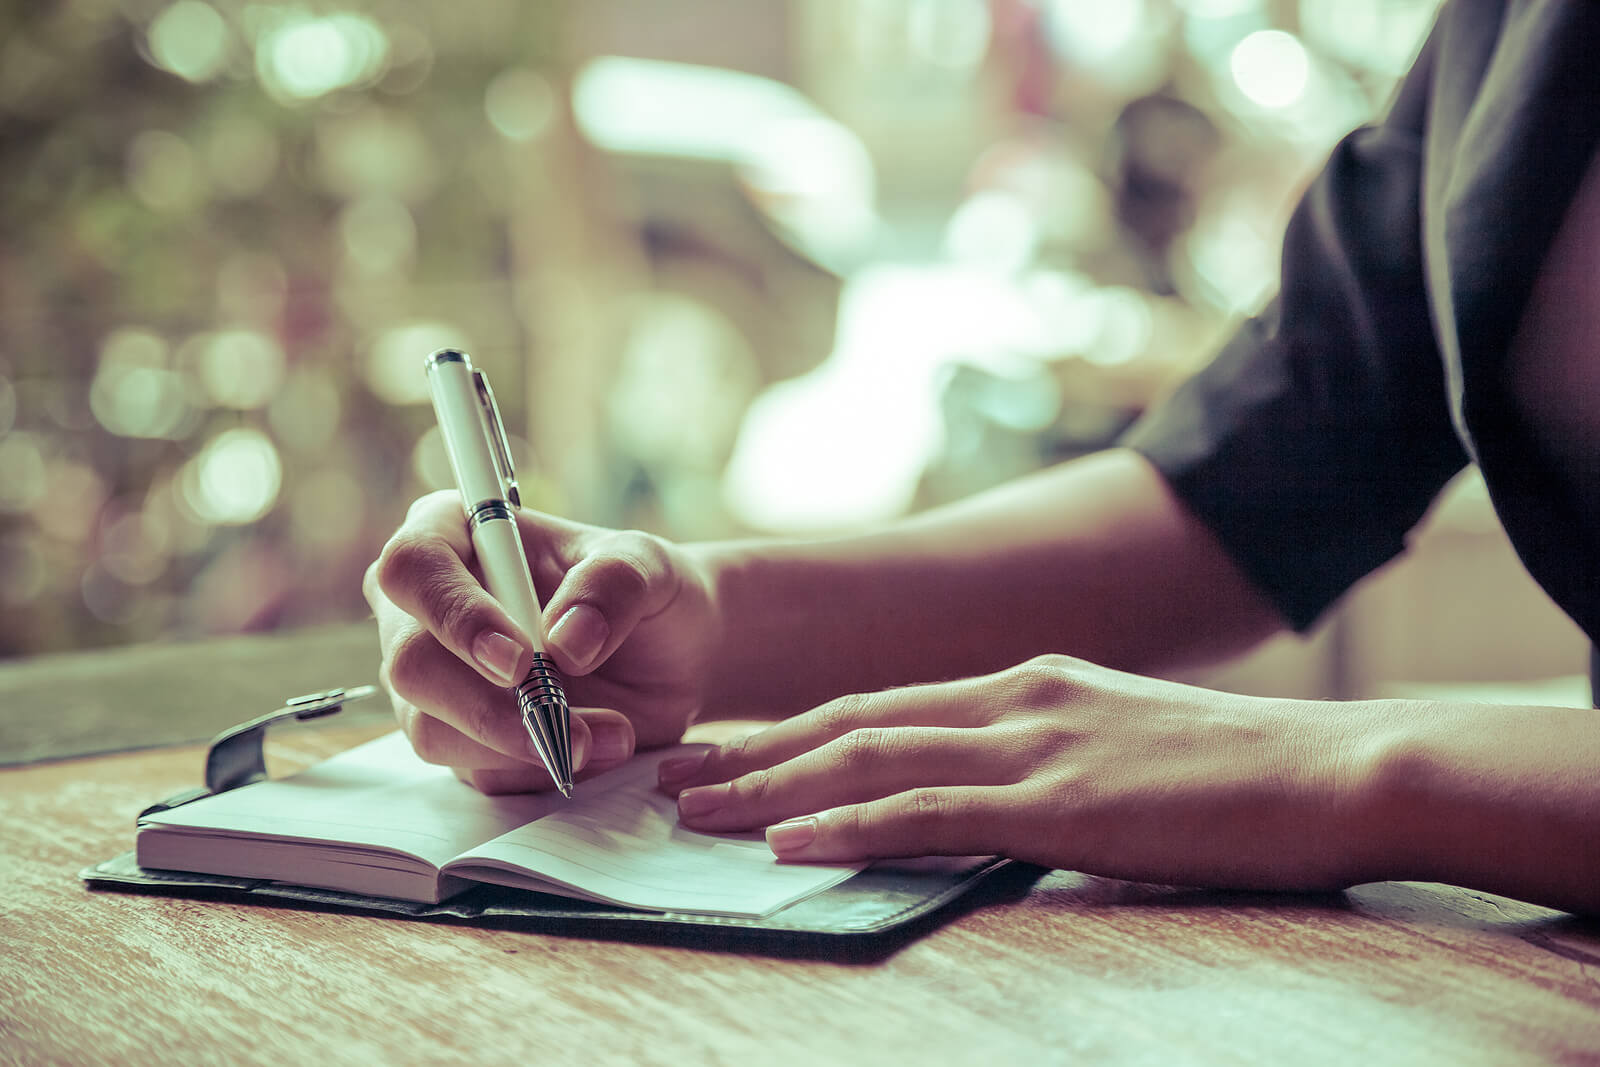 A person sits at a table writing in a journal. Learn to get past your relational trauma in Austin, TX by speaking with a trauma therapist. Start trauma therapy in Austin, TX today! 